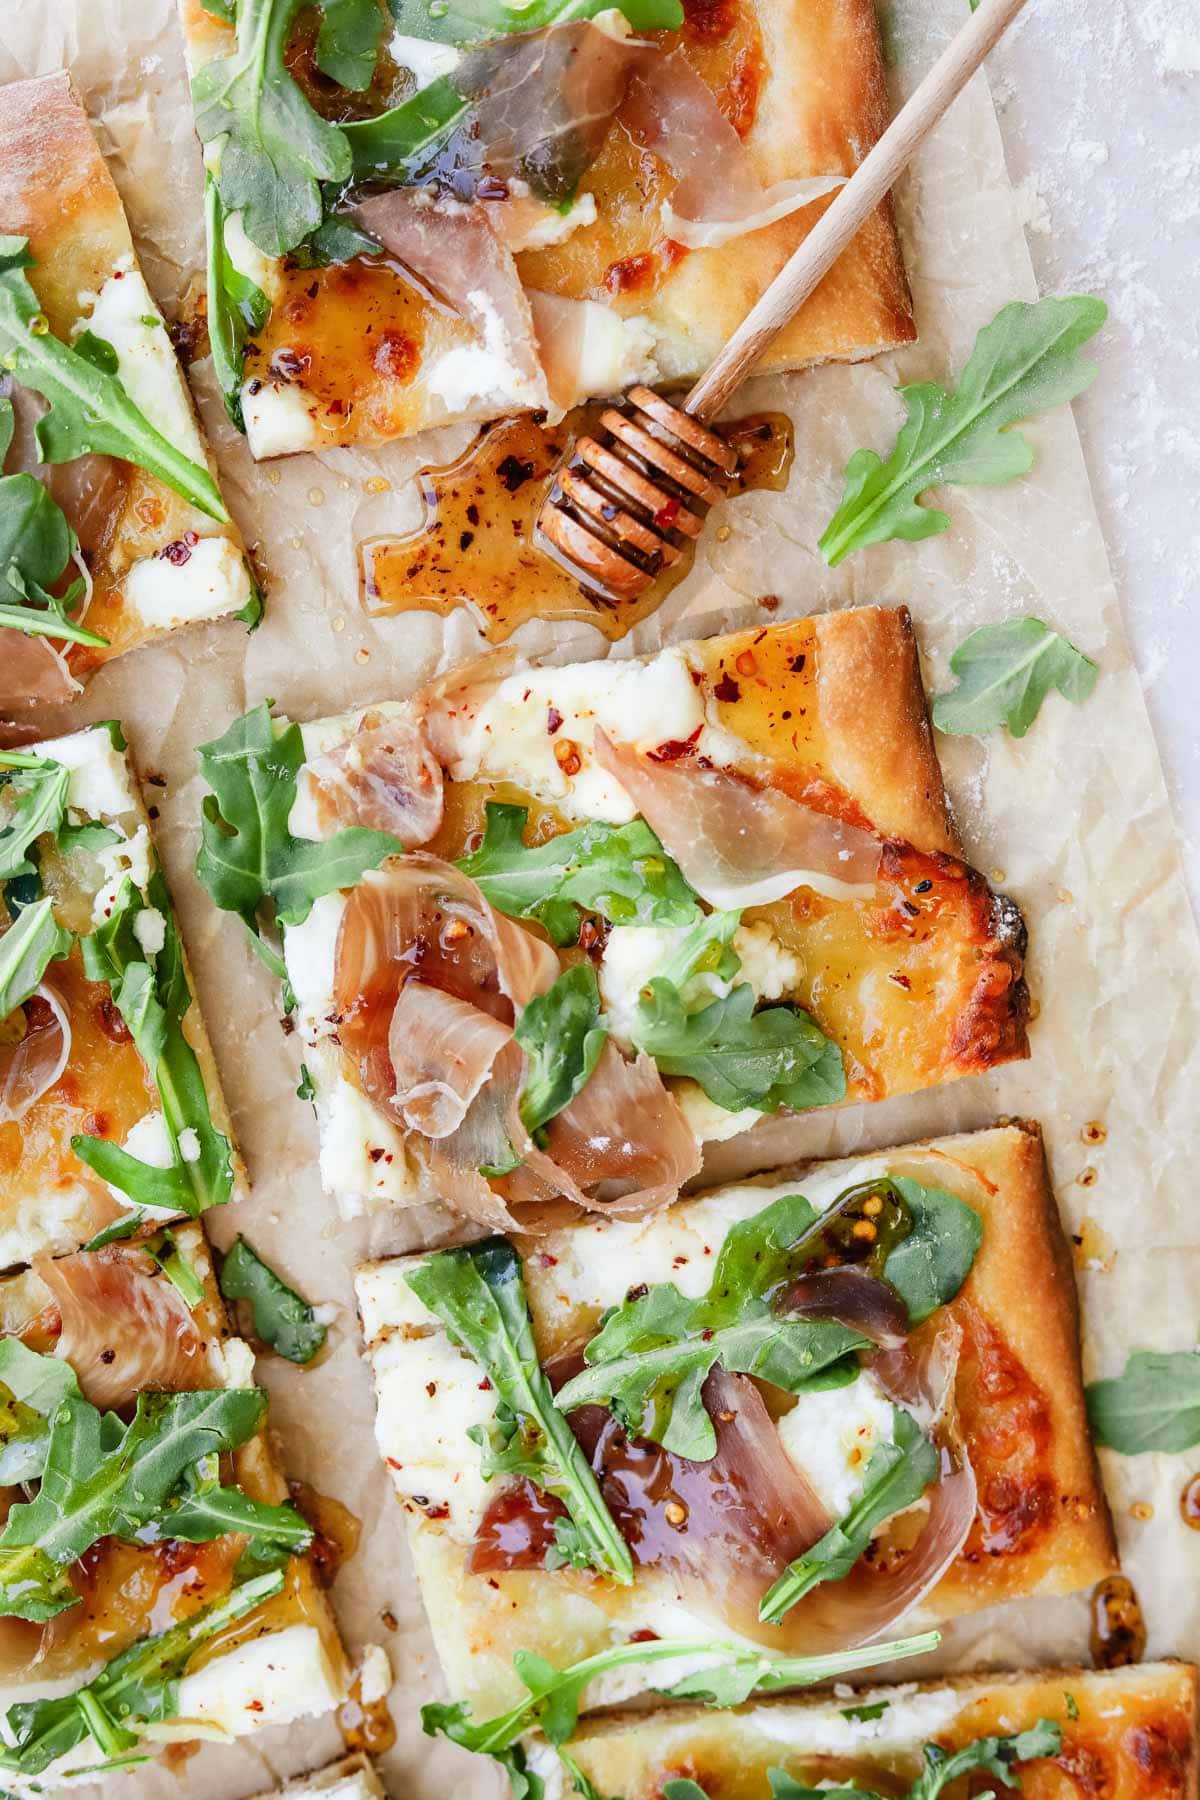 Prosciutto ricotta pizza with arugula and hot honey on parchment paper.